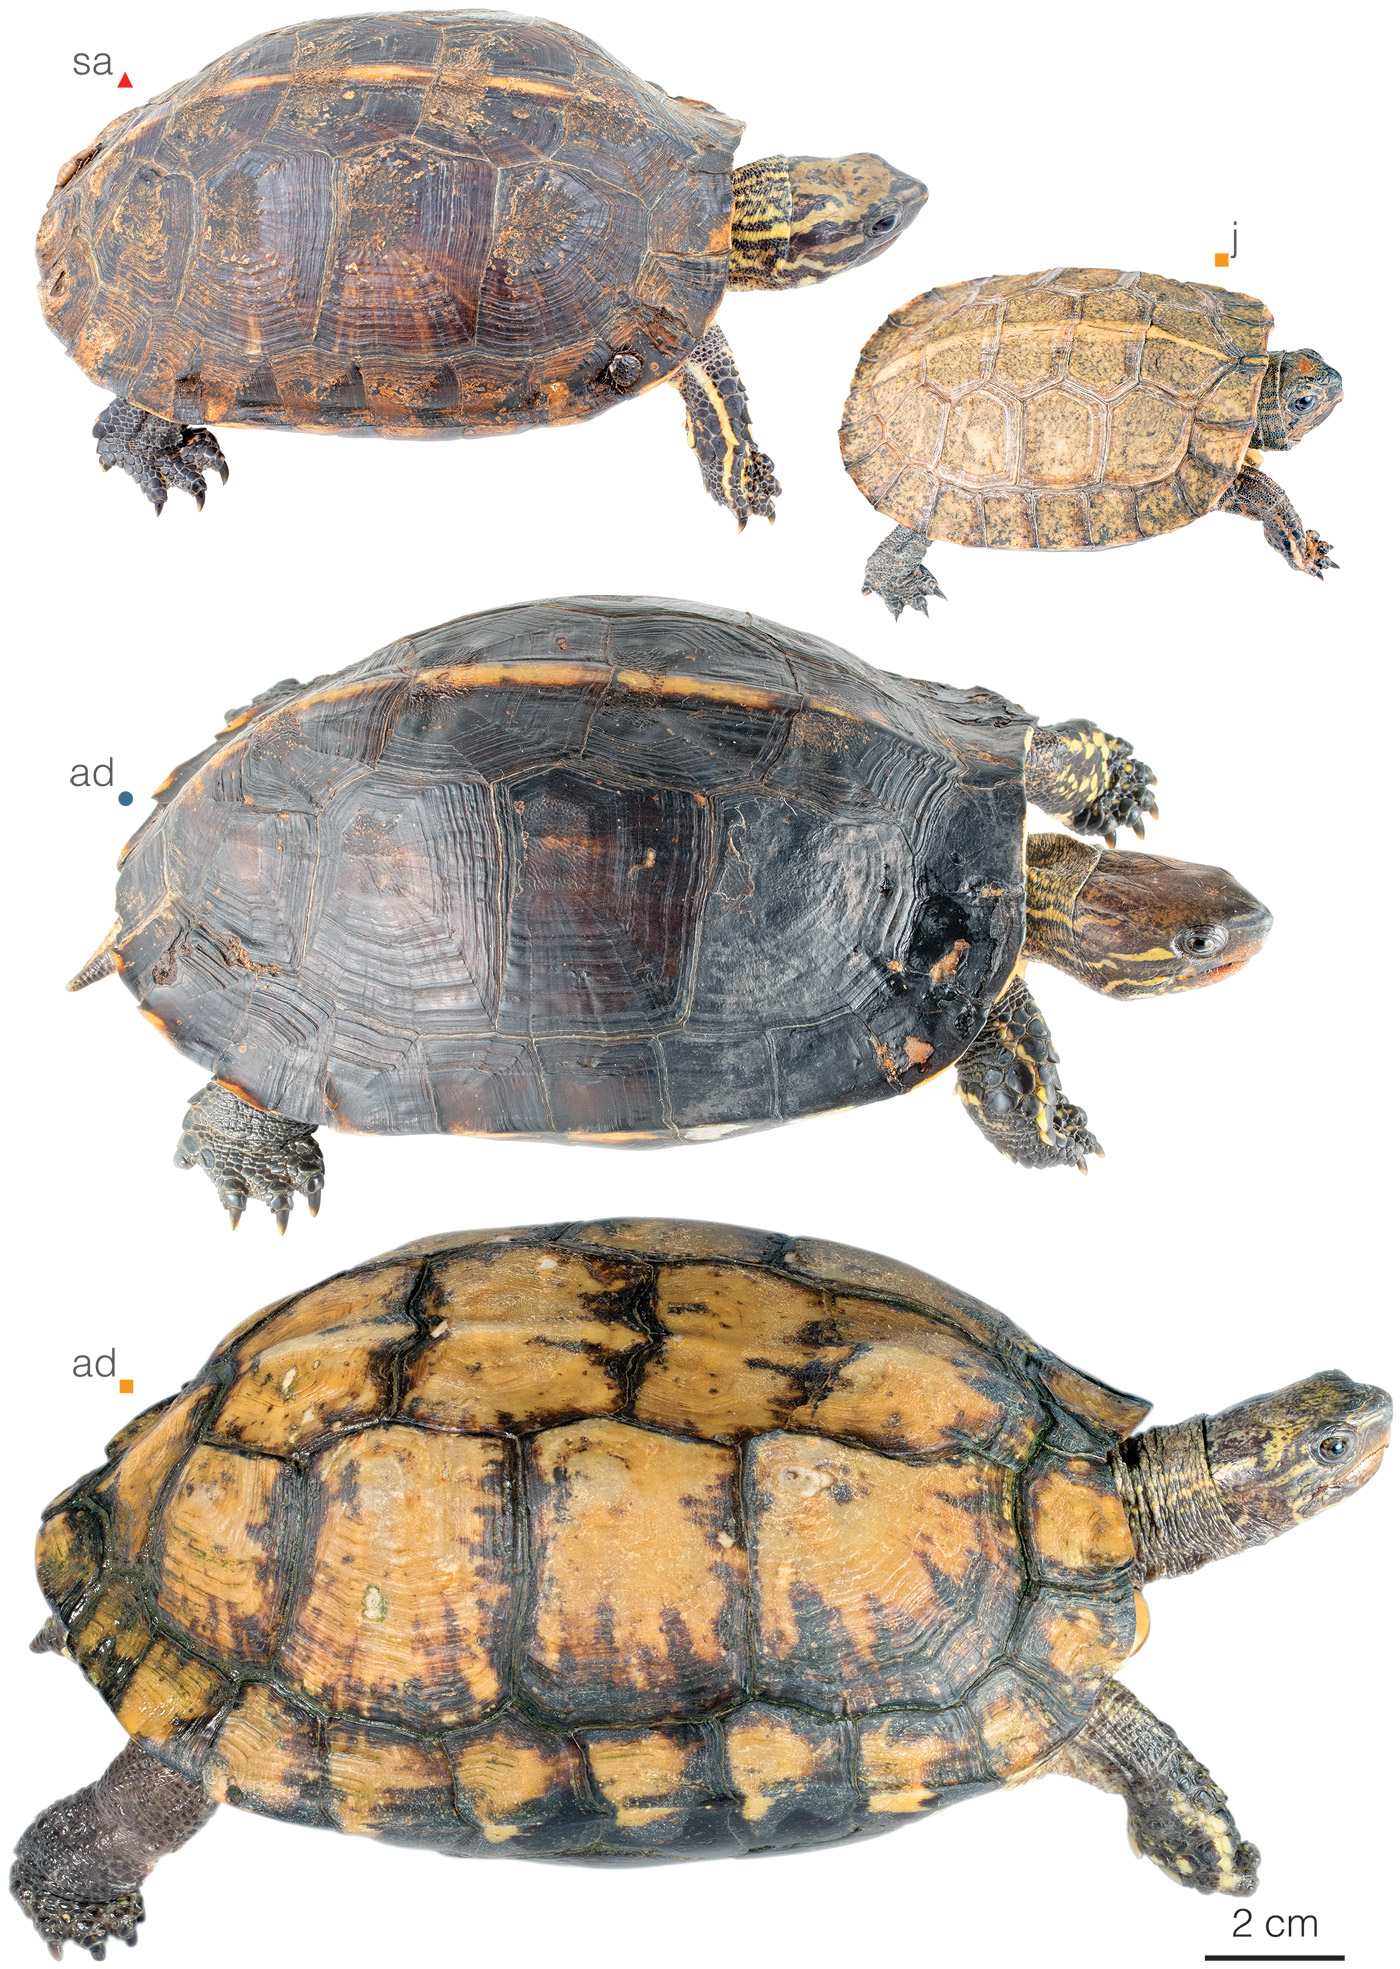 Figure showing variation among individuals of Rhinoclemmys annulata